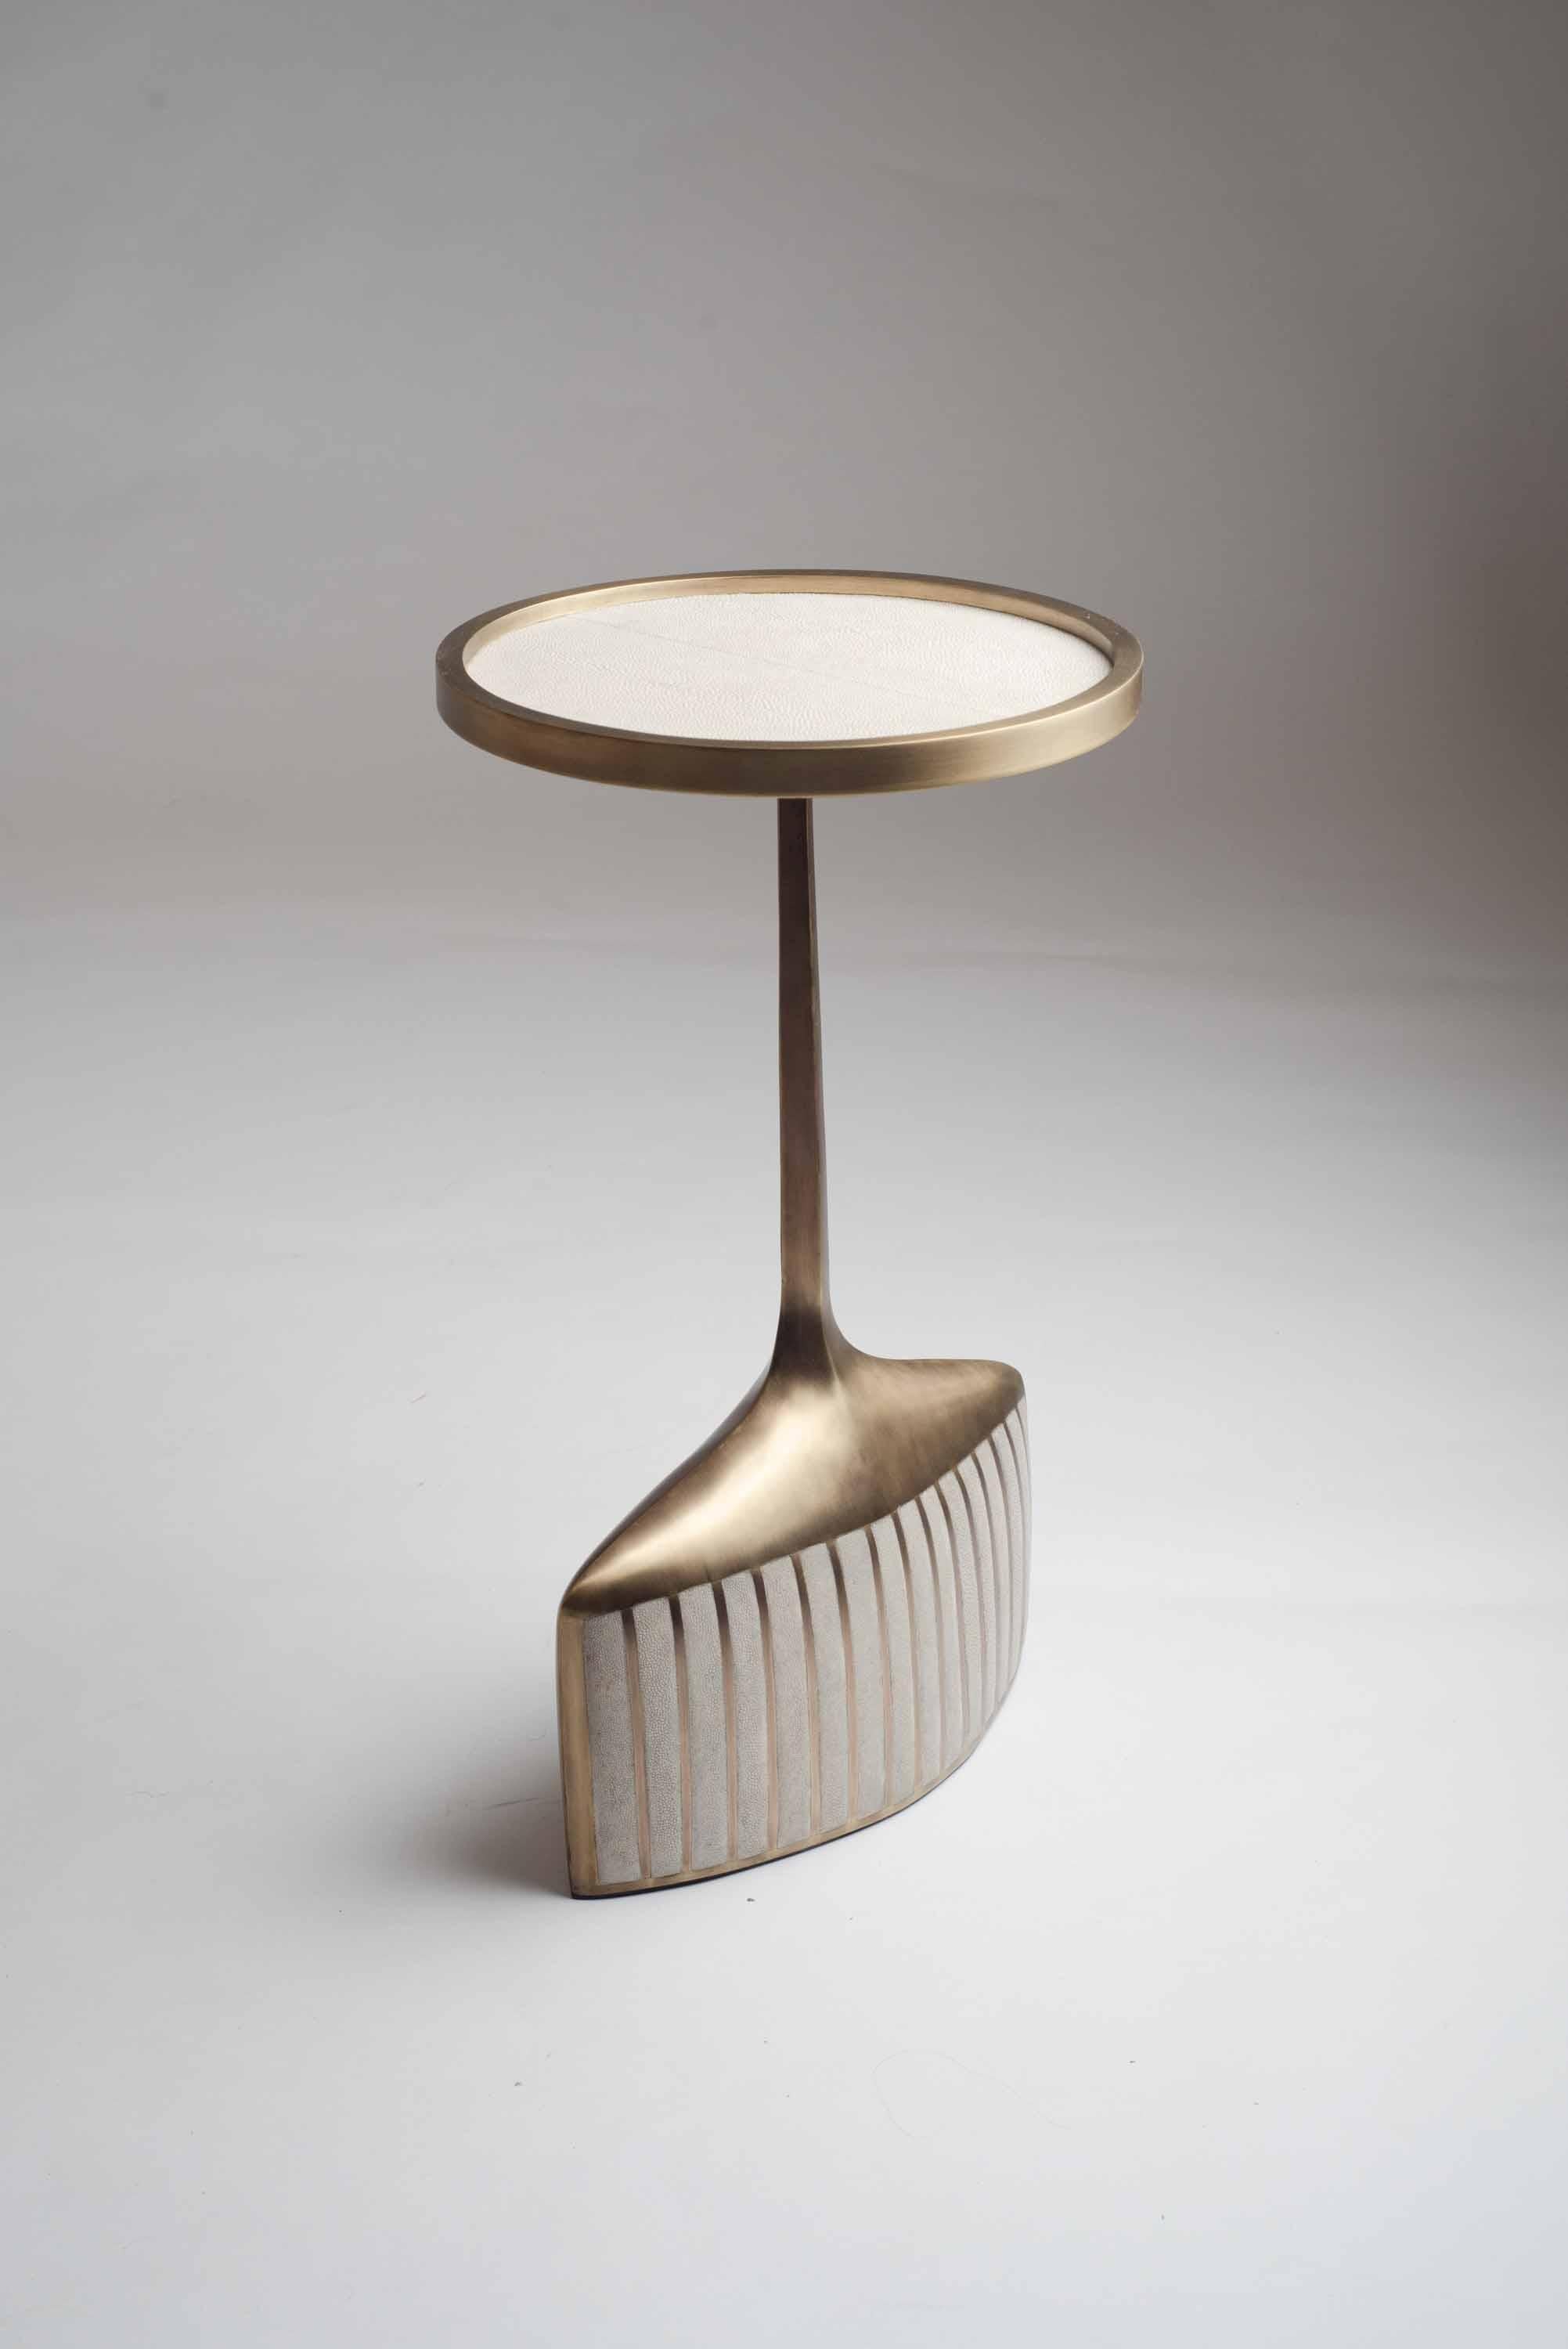 Shagreen Stingray Set of 2 Pedestal Tables in Shagreen, Shell, and Brass by R&Y Augousti For Sale